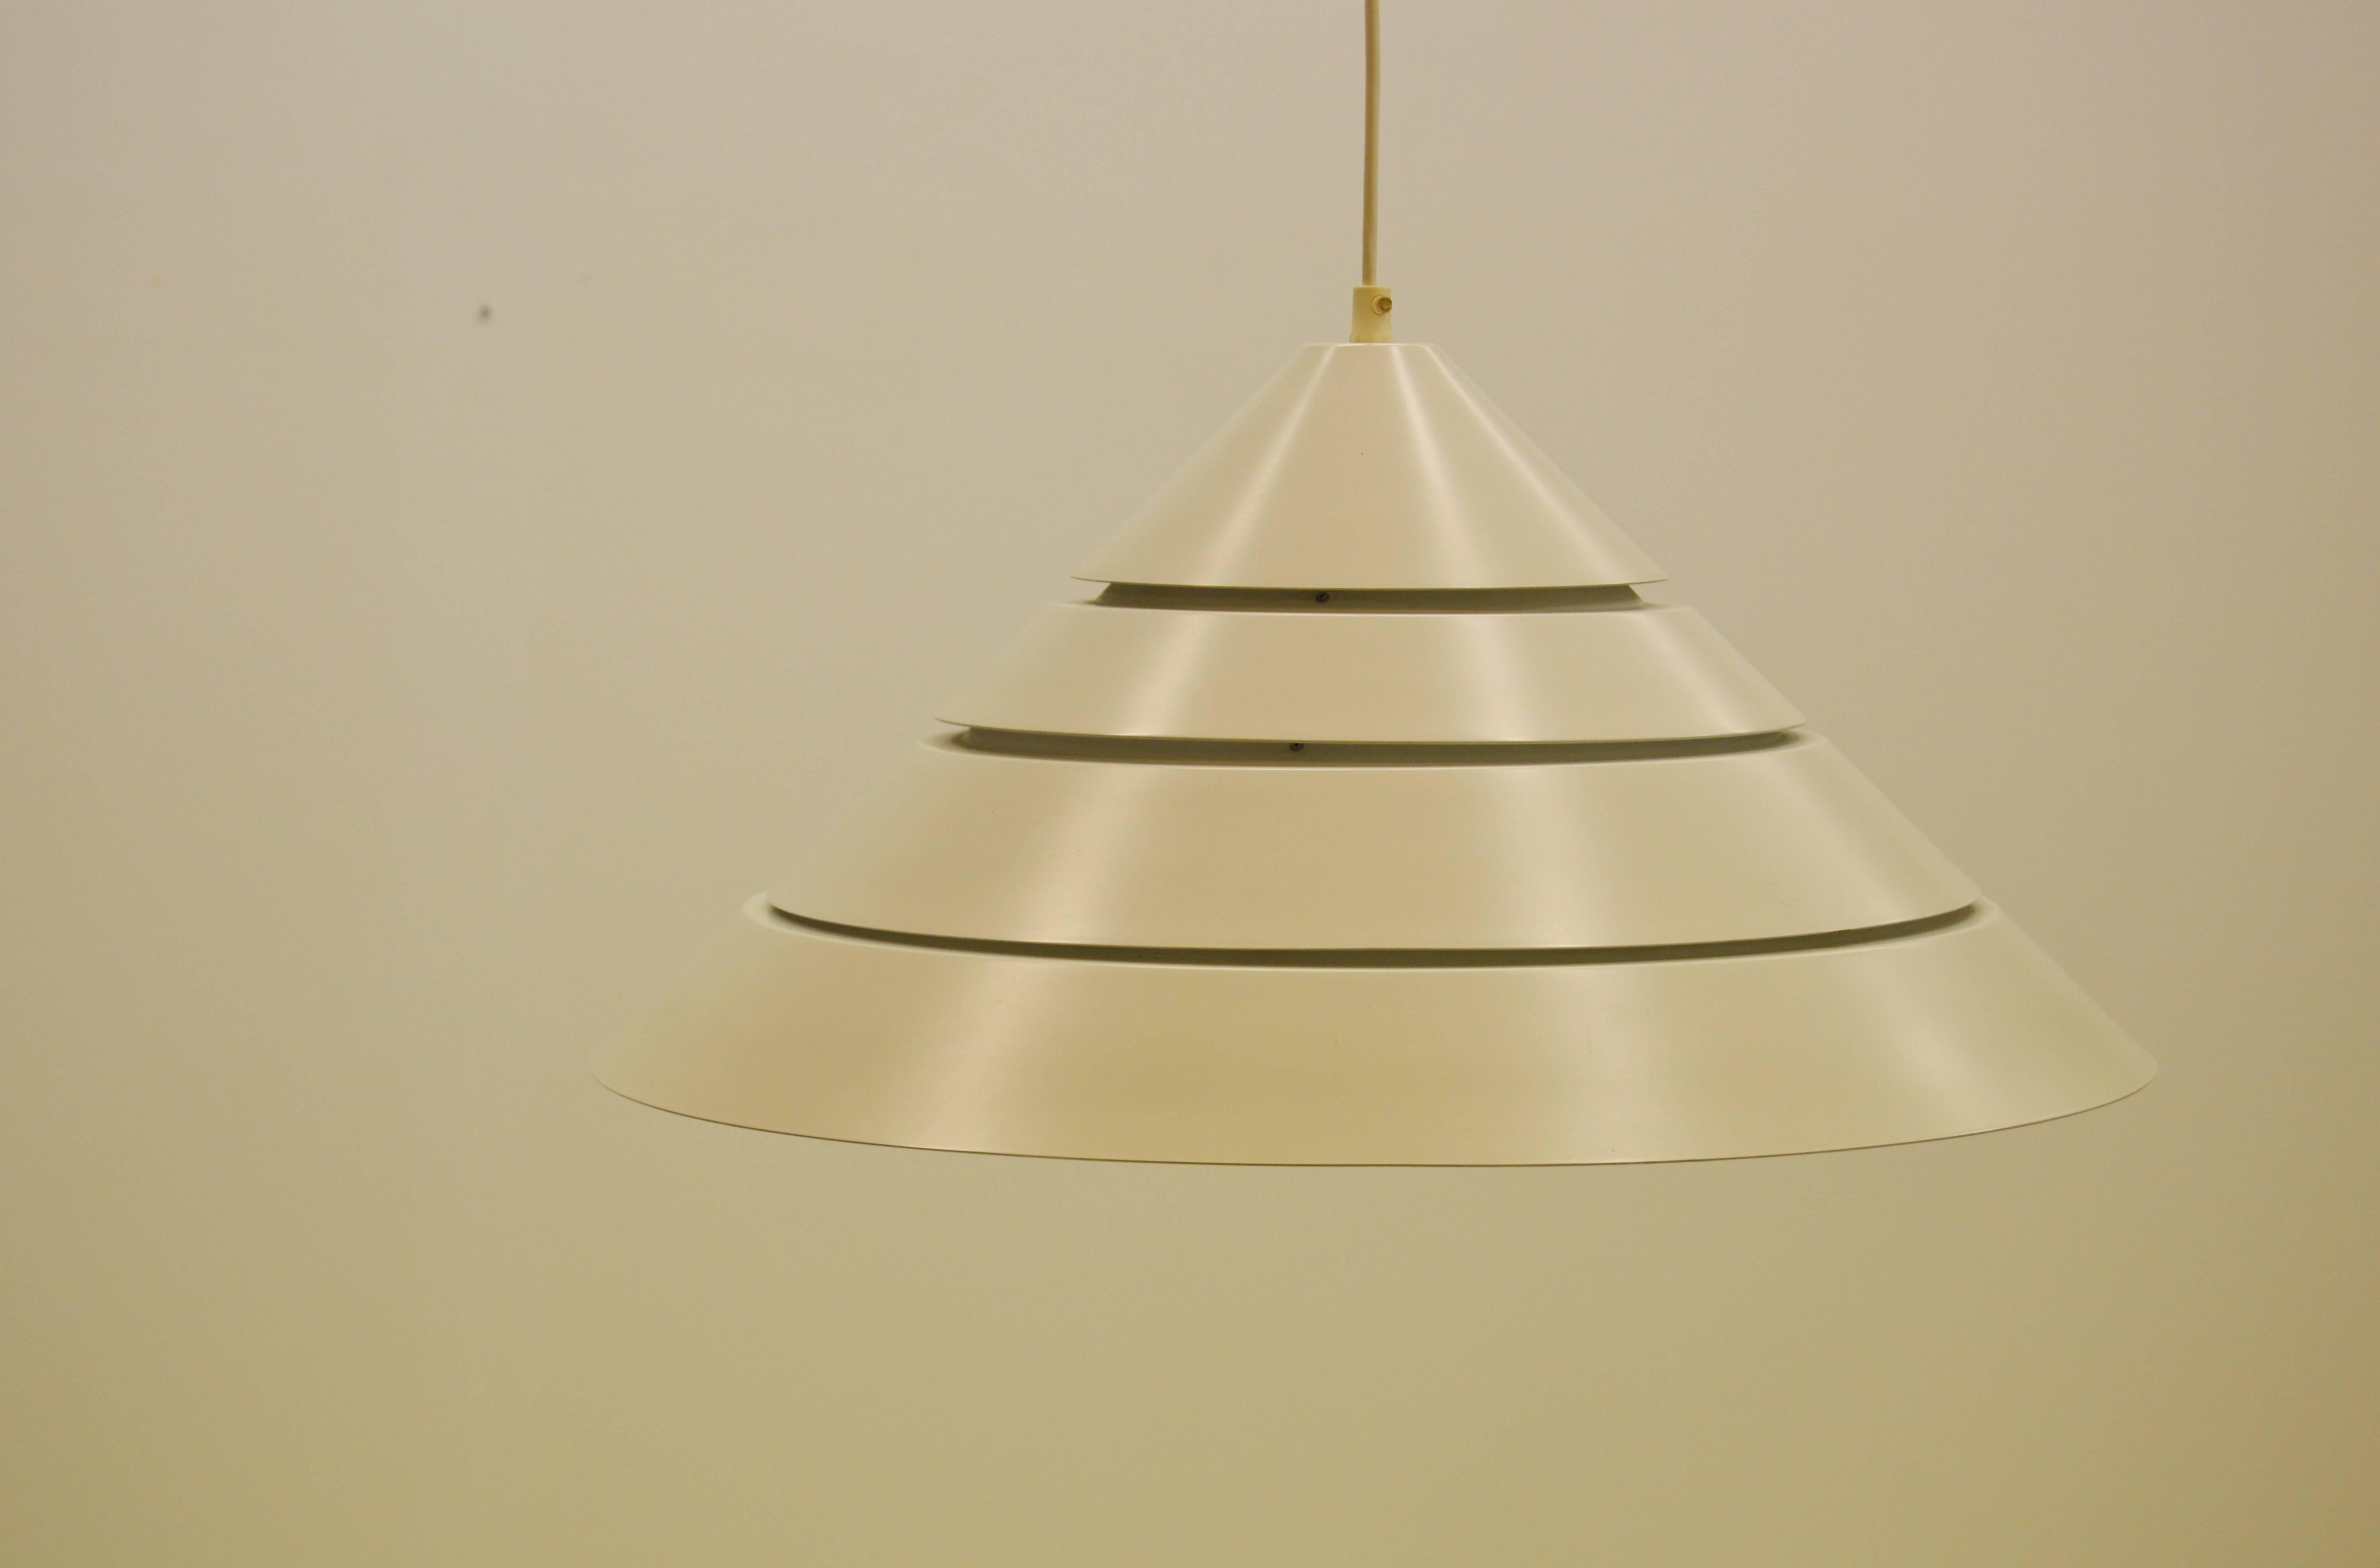 Large cone shaped ceiling light. White laquered metal.
Designed by Hans-Agne Jakobsson.
Height below is given without the cord.